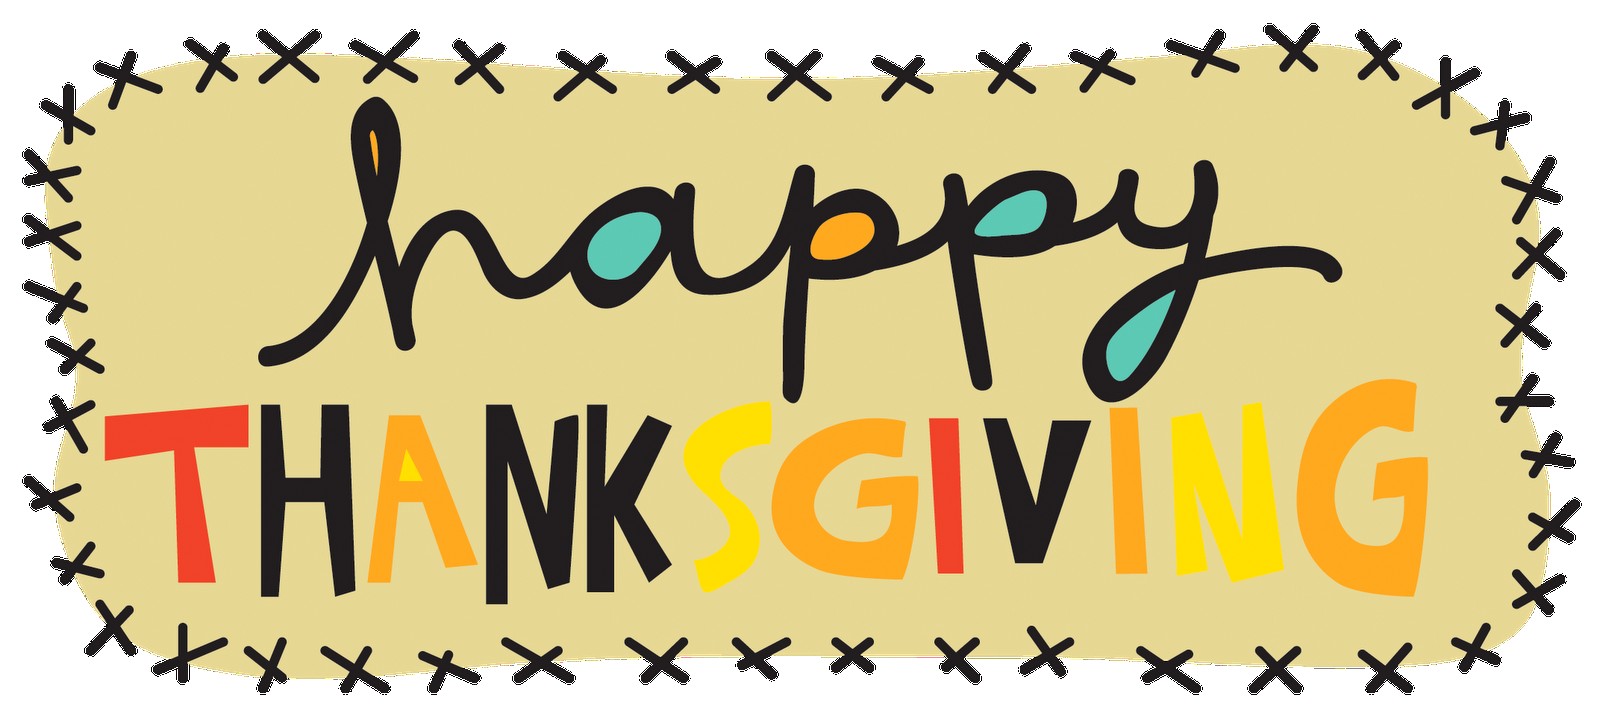 28 collection of happy thanksgiving clipart in spanish high also.png